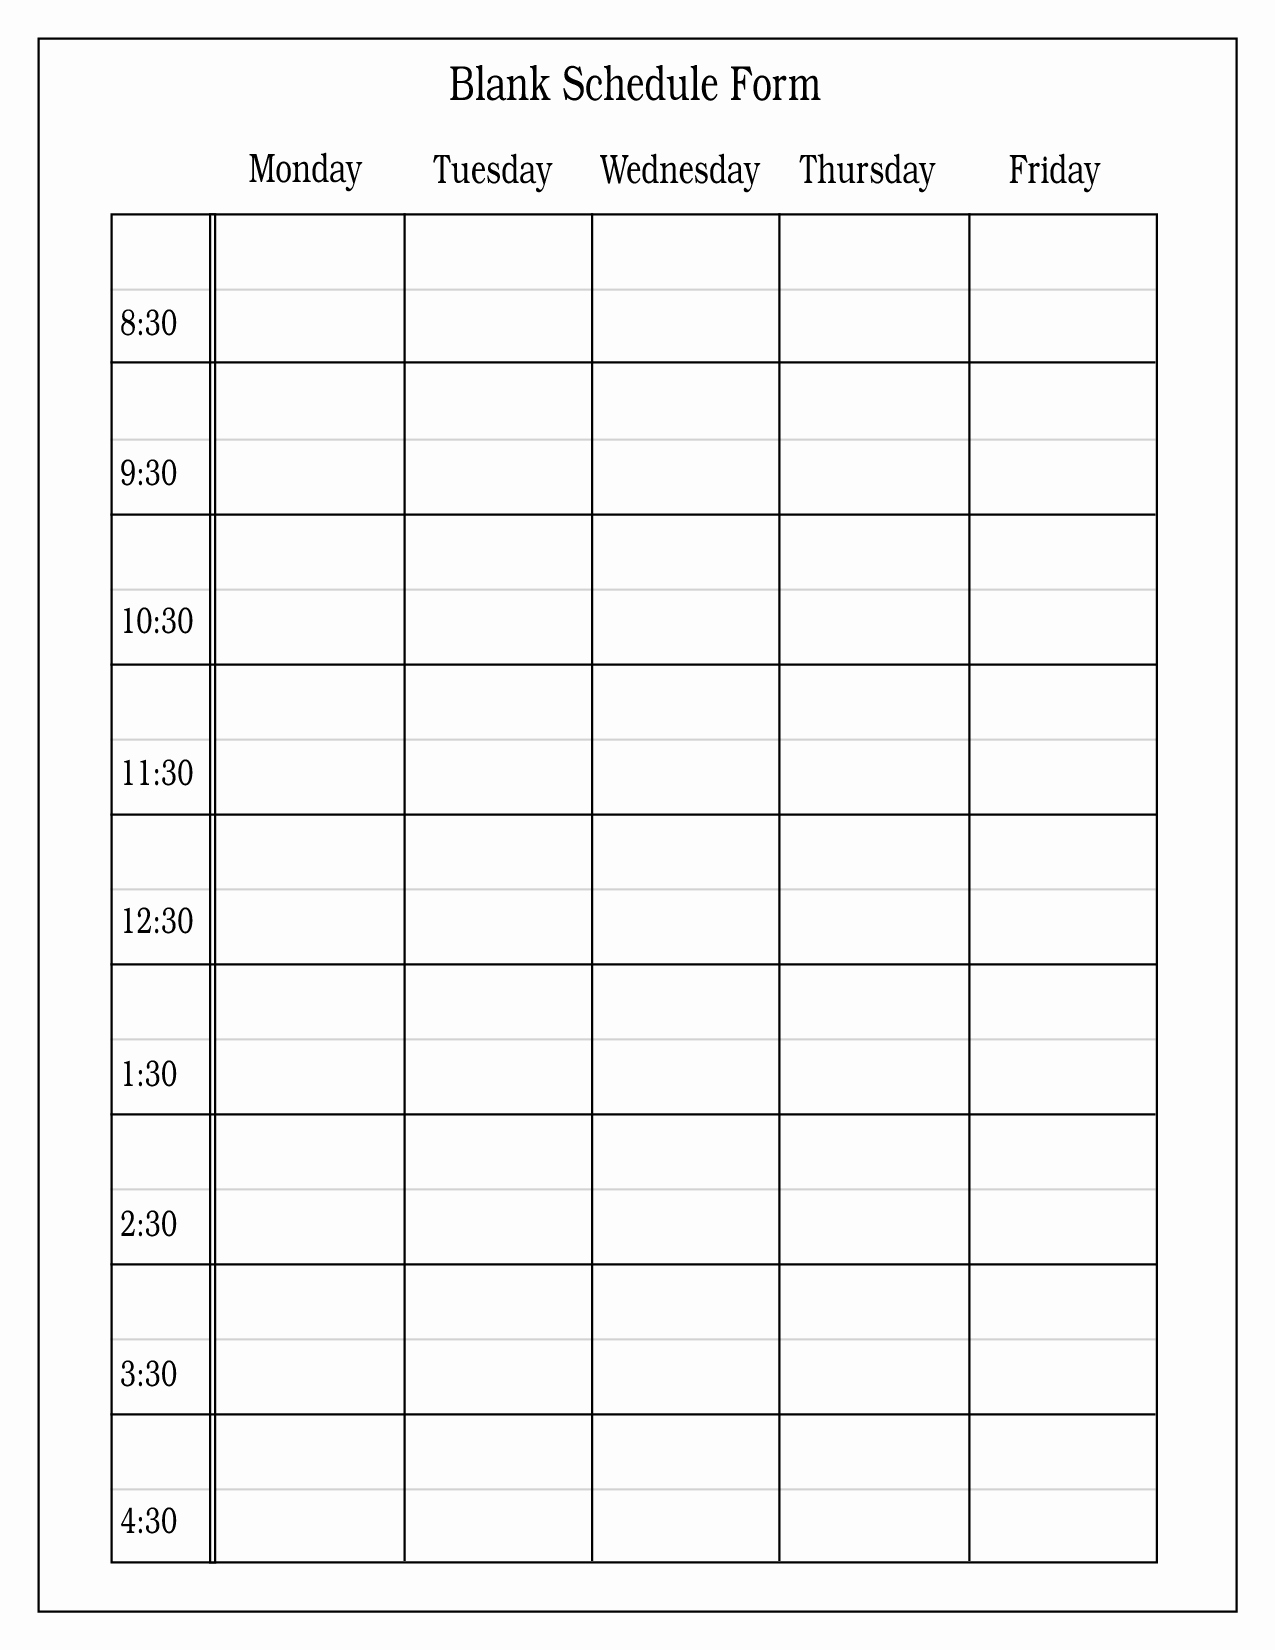 Employee Shift Scheduling Template Best Of Employee Scheduling A Free Employee Schedule